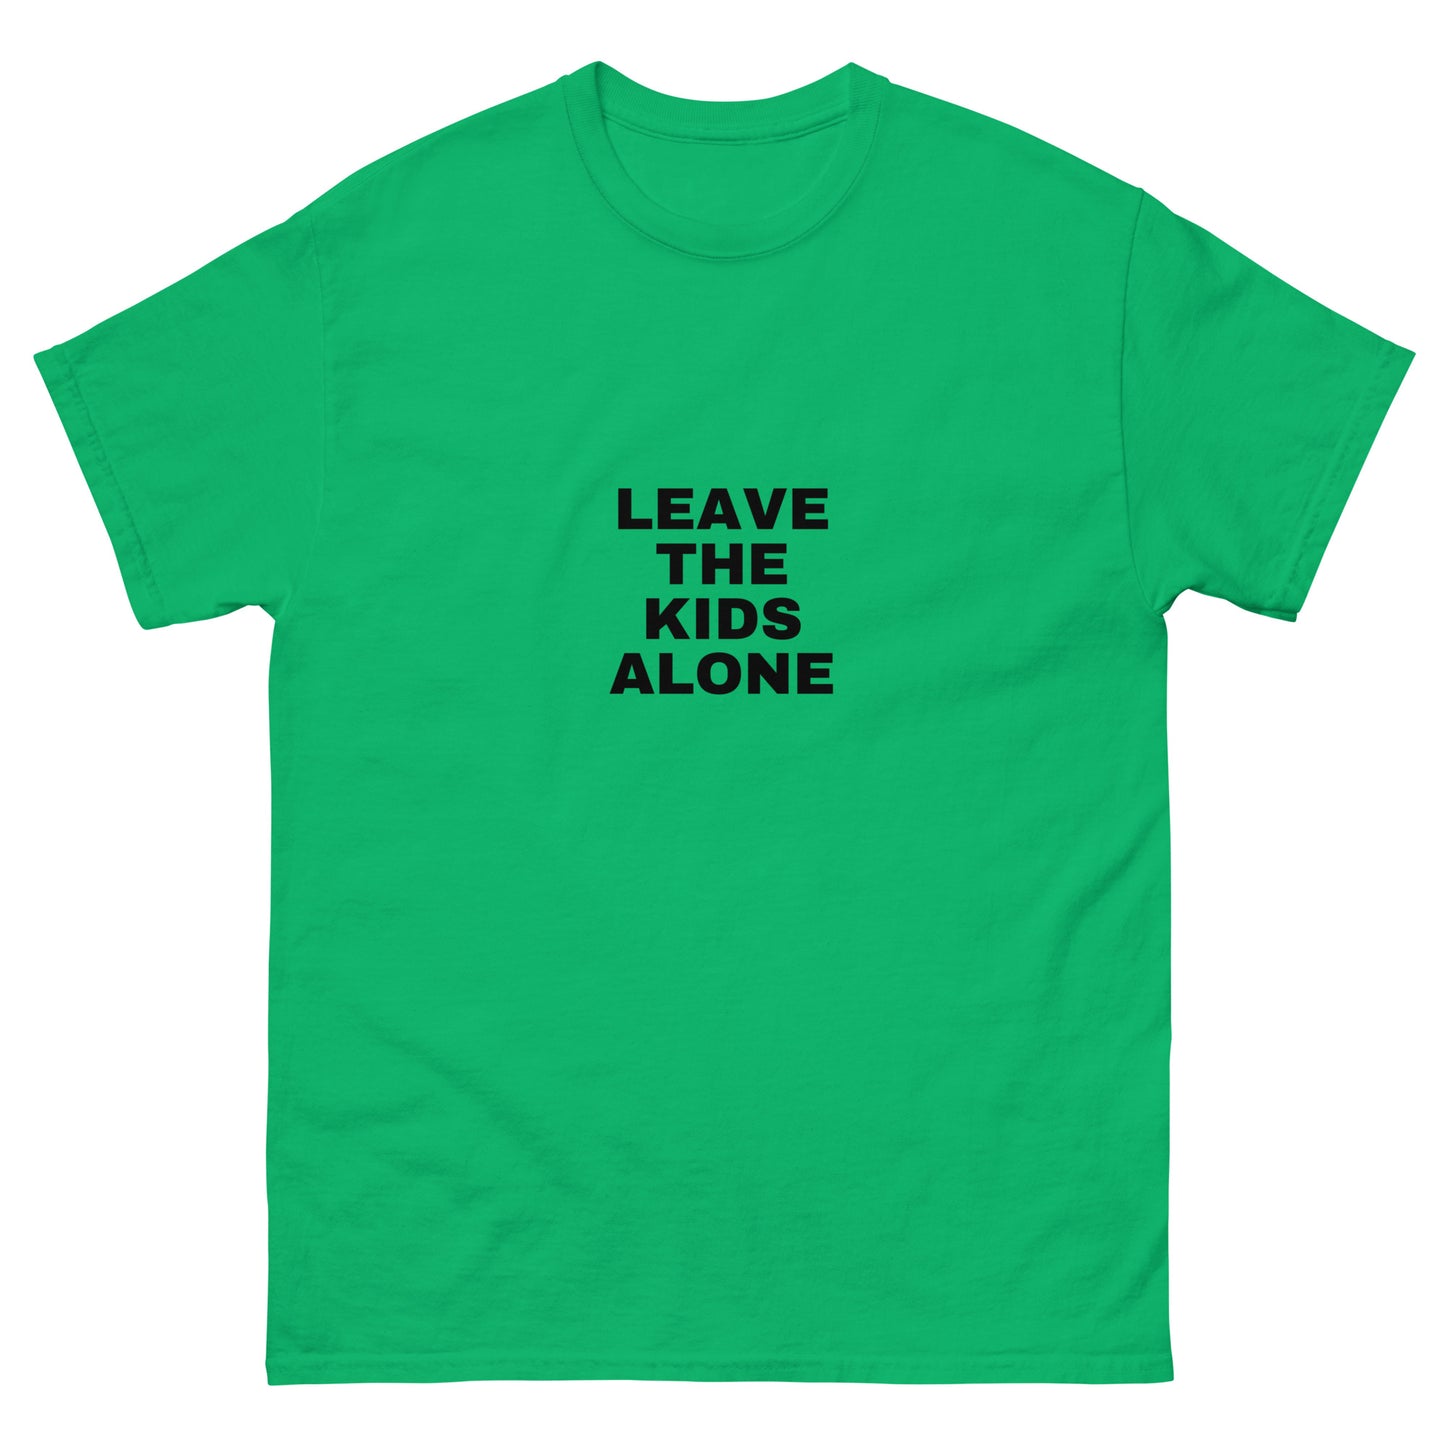 Leave The Kids Alone - Classic Tee